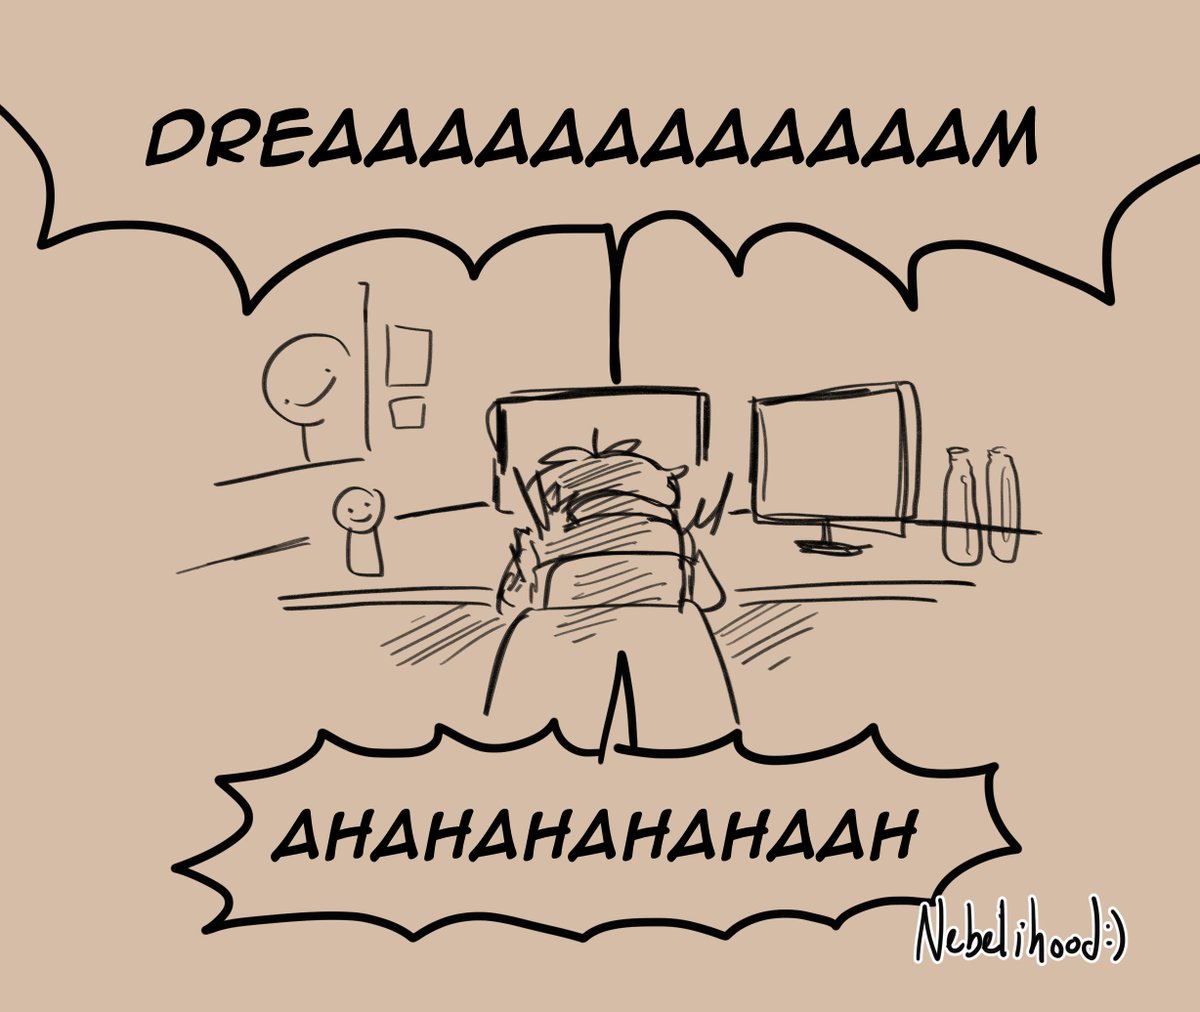 Dream Face Reveal pt.4

OKAY IT FINALLY REACHED 100RTS, HERE'S THE NEXT PART, COULD WE BE CLOSE???

#dnffanart #DNF #dreamnotfoundfanart #comic #GNF #dream https://t.co/GOejSCAZZm 